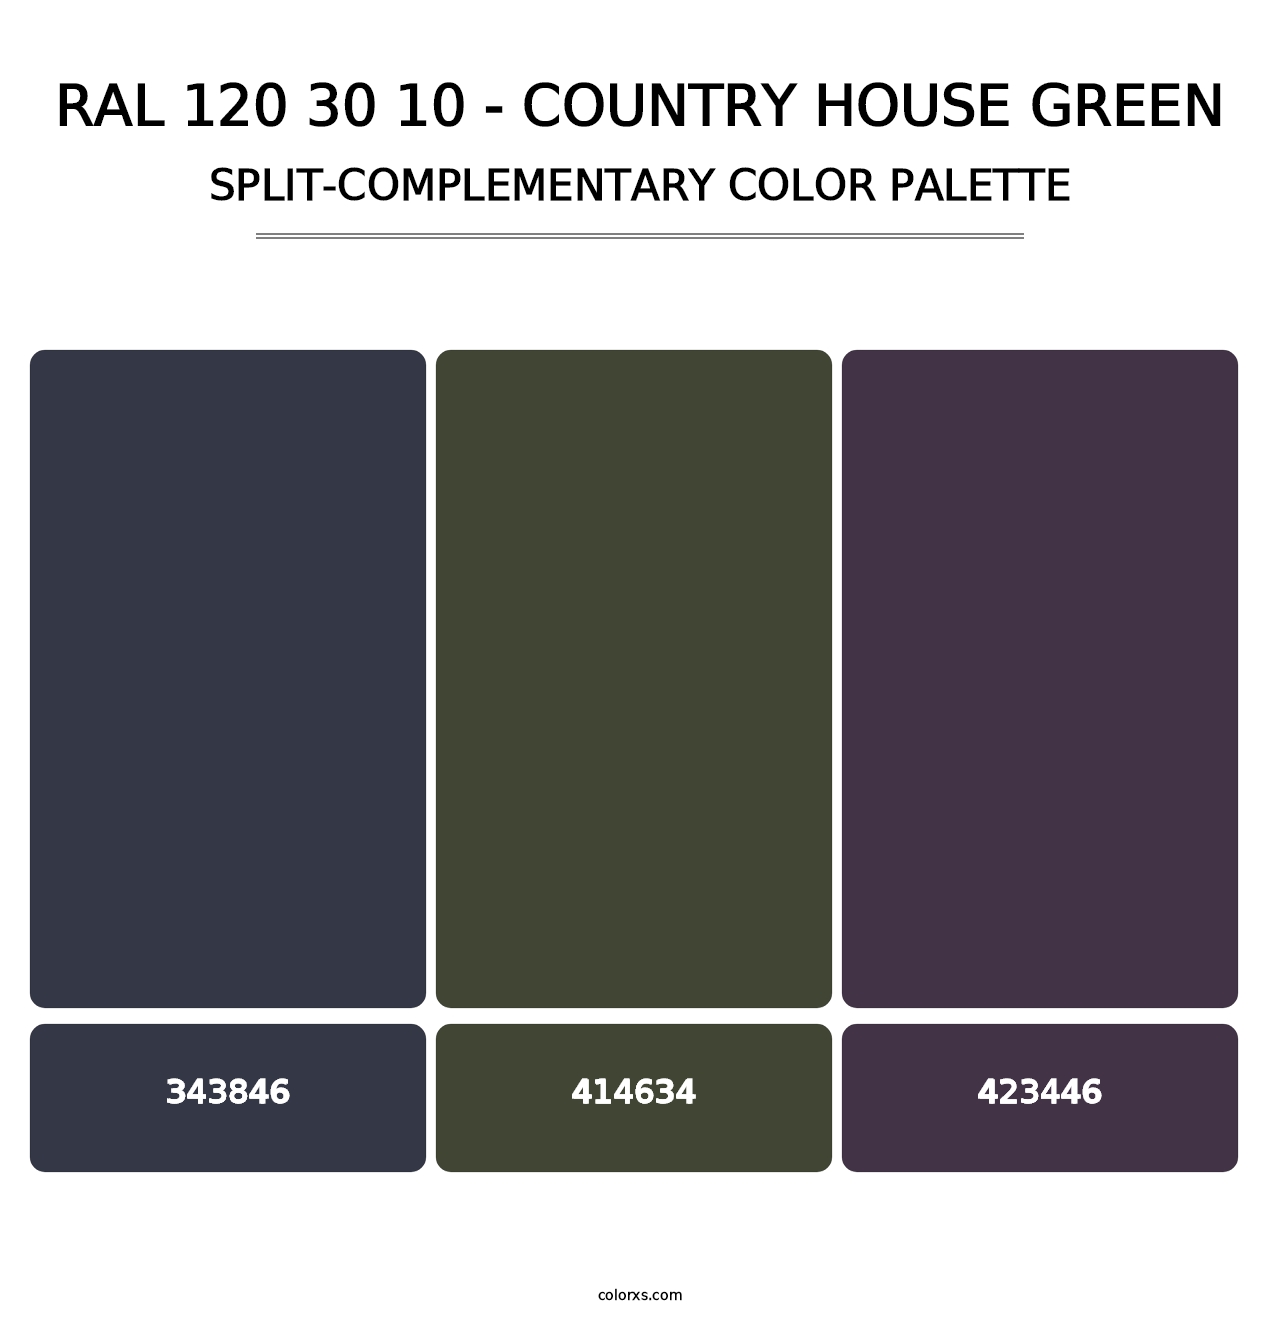 RAL 120 30 10 - Country House Green - Split-Complementary Color Palette